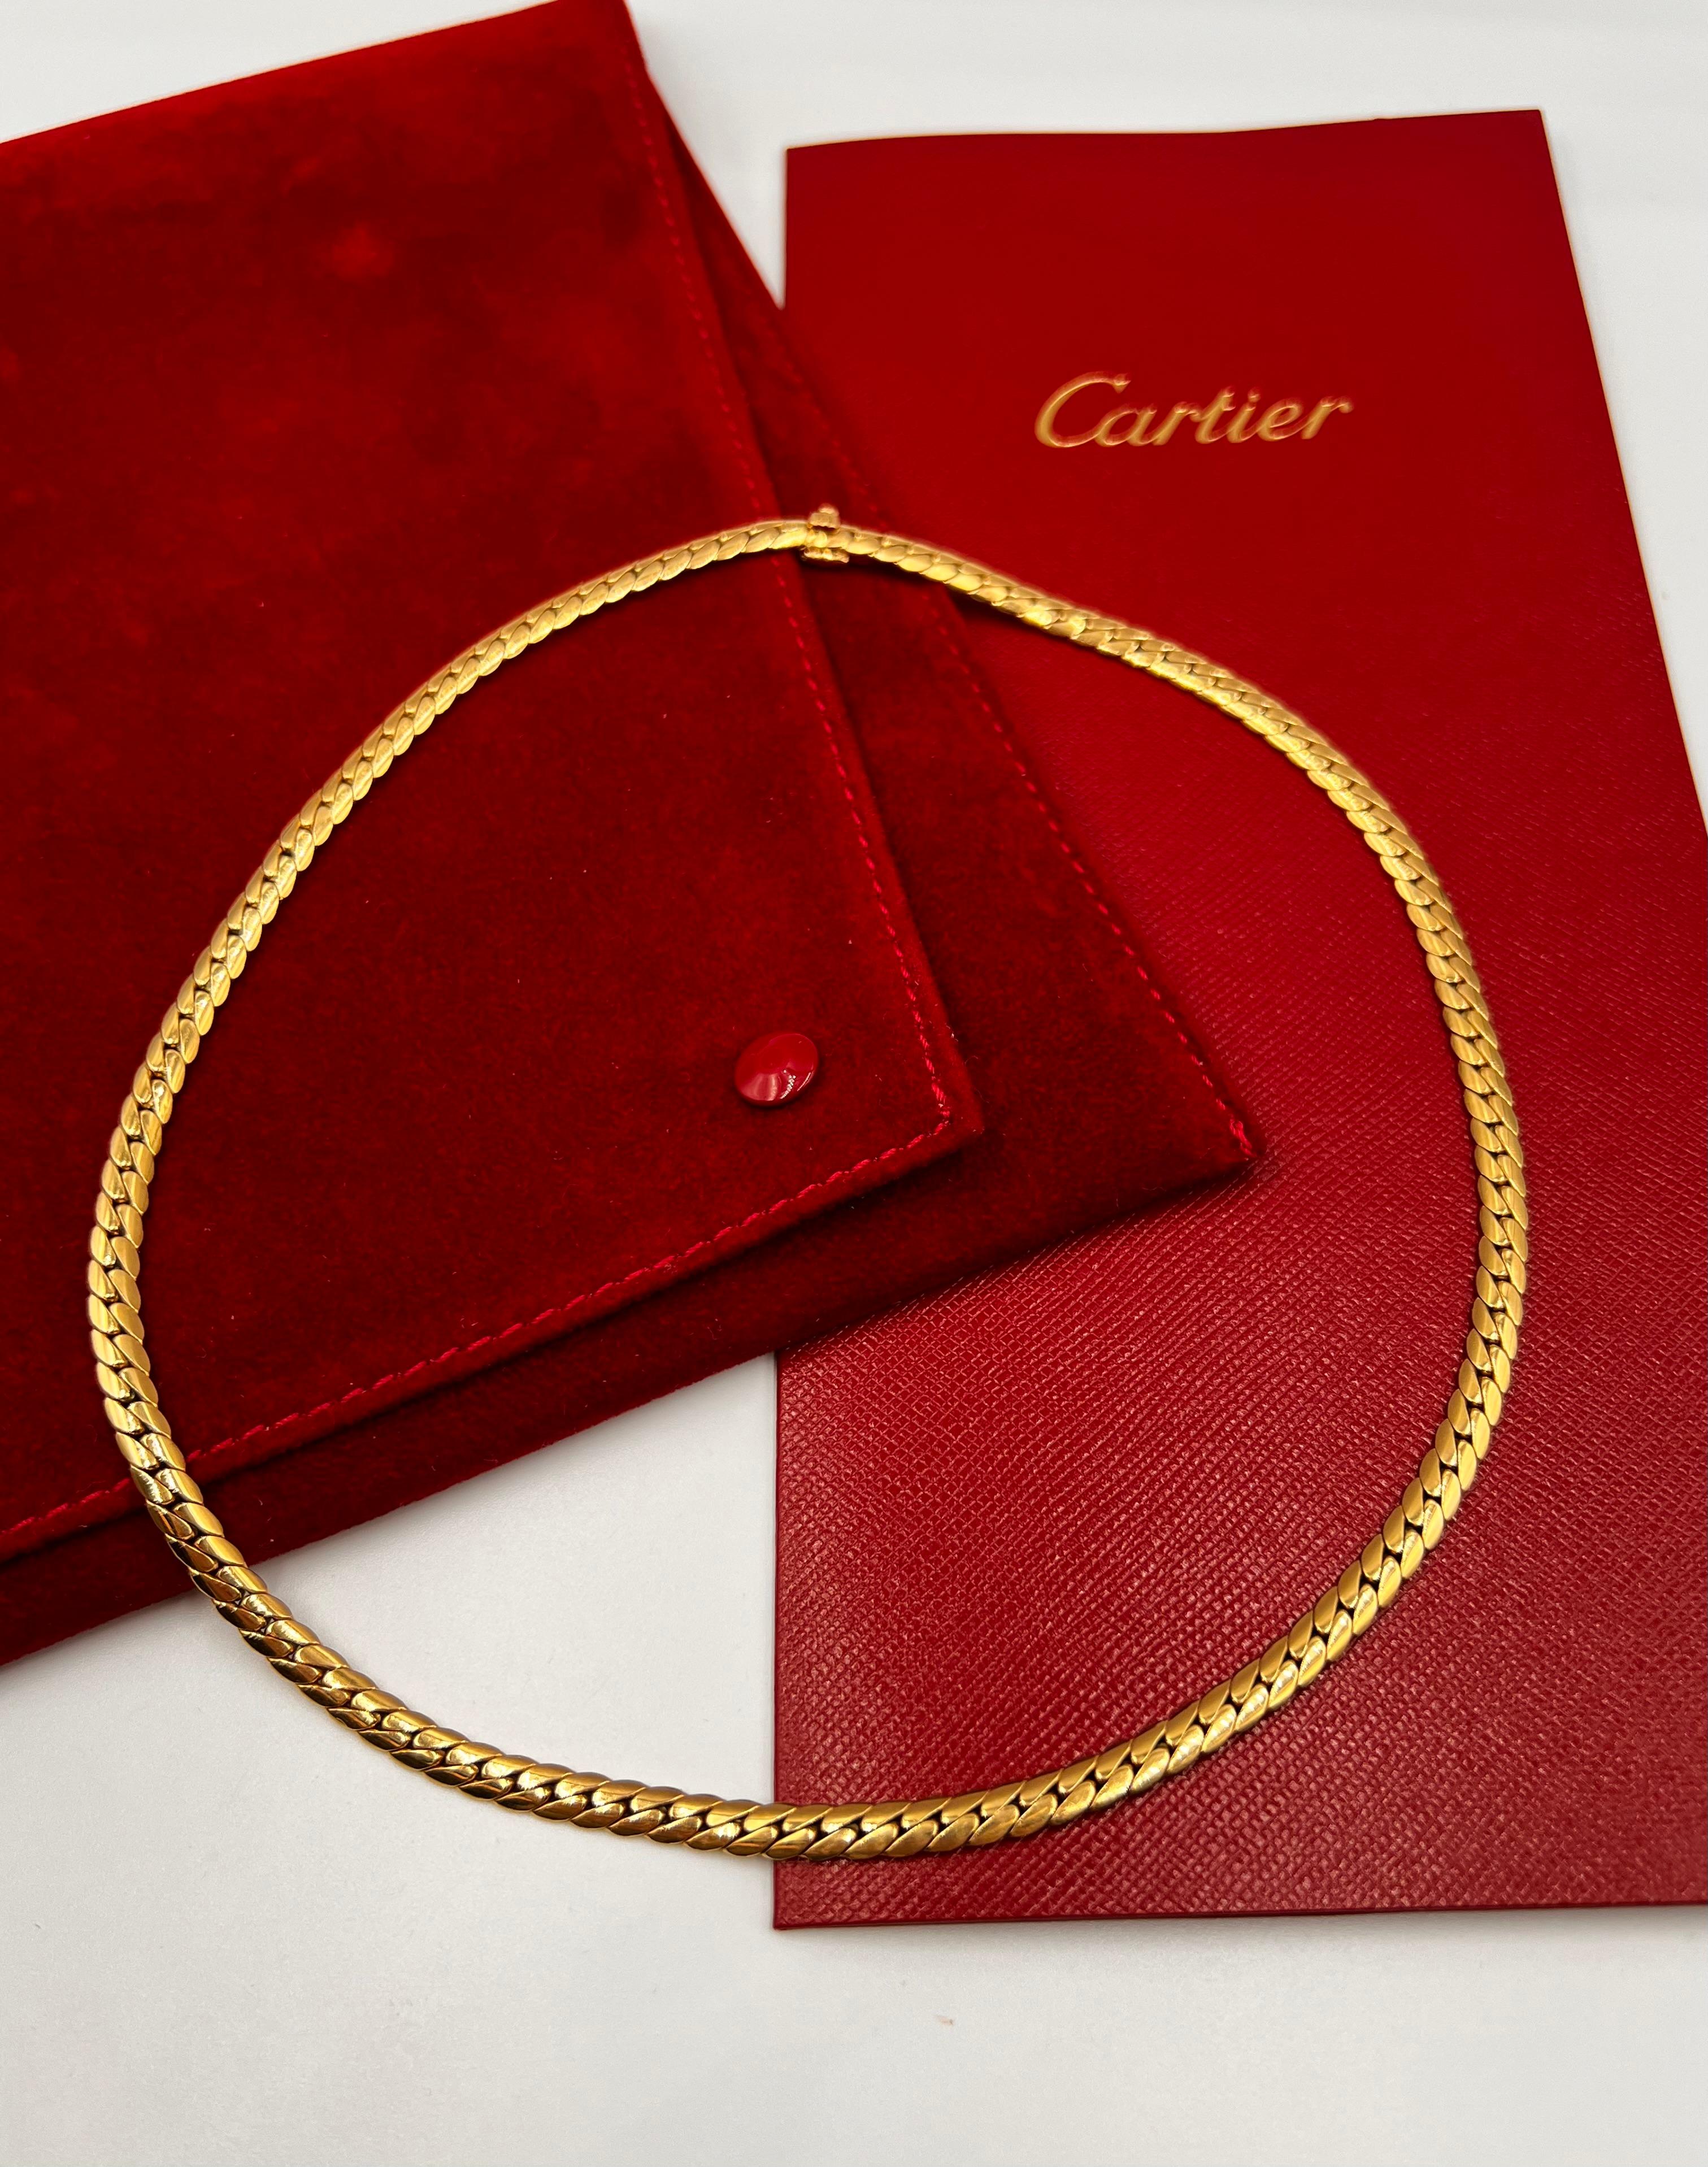 Modern Cartier 18k Yellow Gold Link Chain Necklace